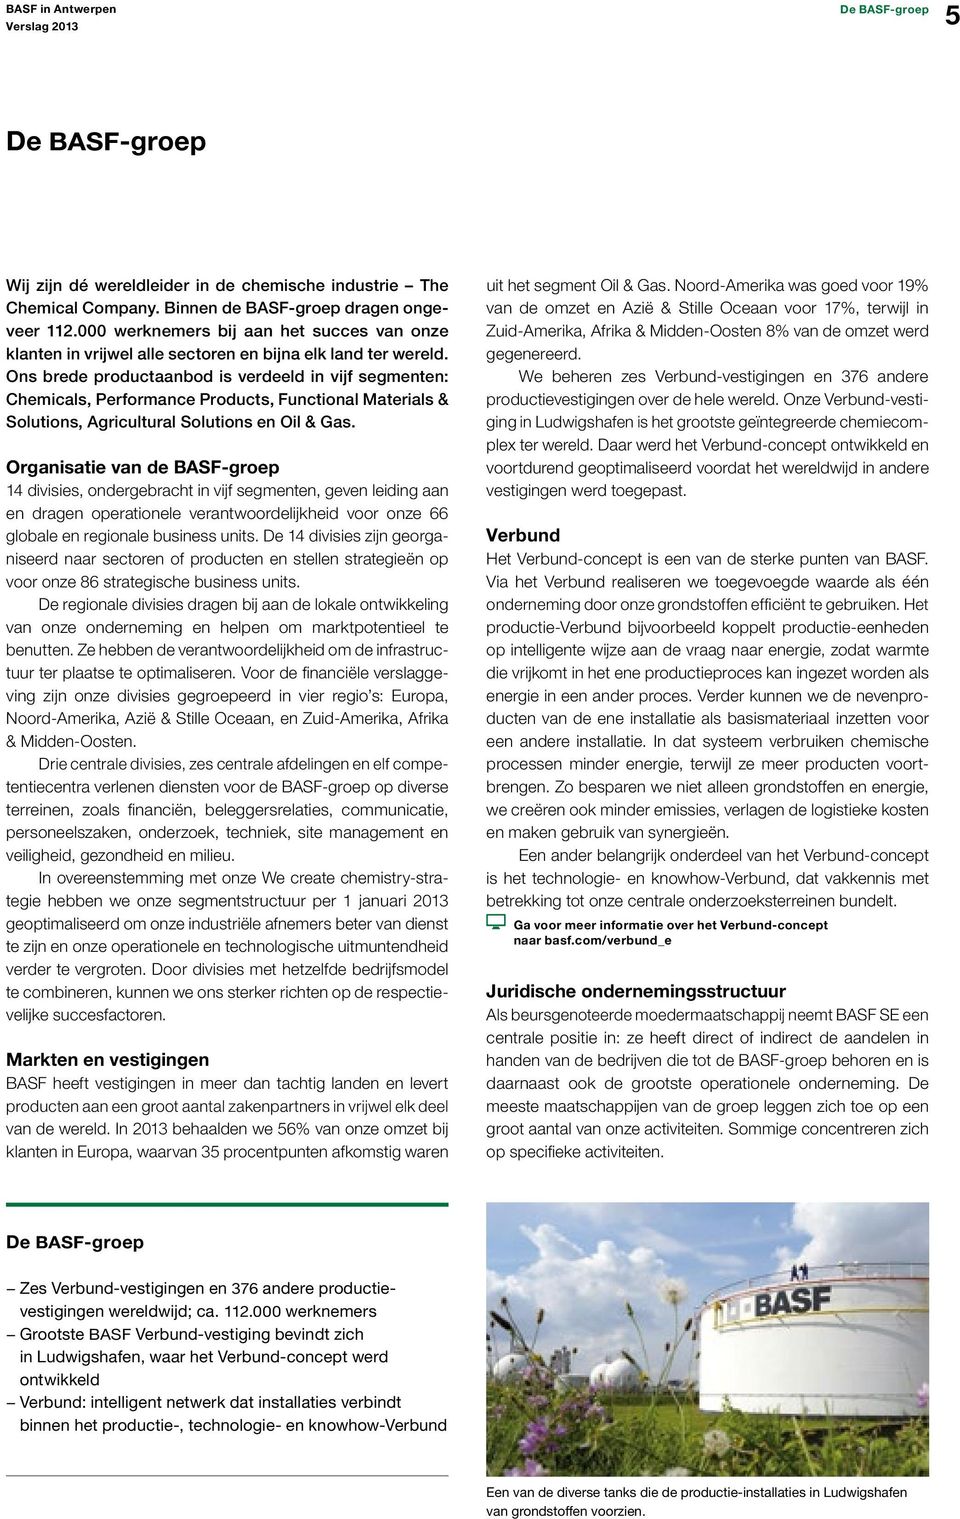 Ons brede productaanbod is verdeeld in vijf segmenten: Chemicals, Performance Products, Functional Materials & Solutions, Agricultural Solutions en Oil & Gas.